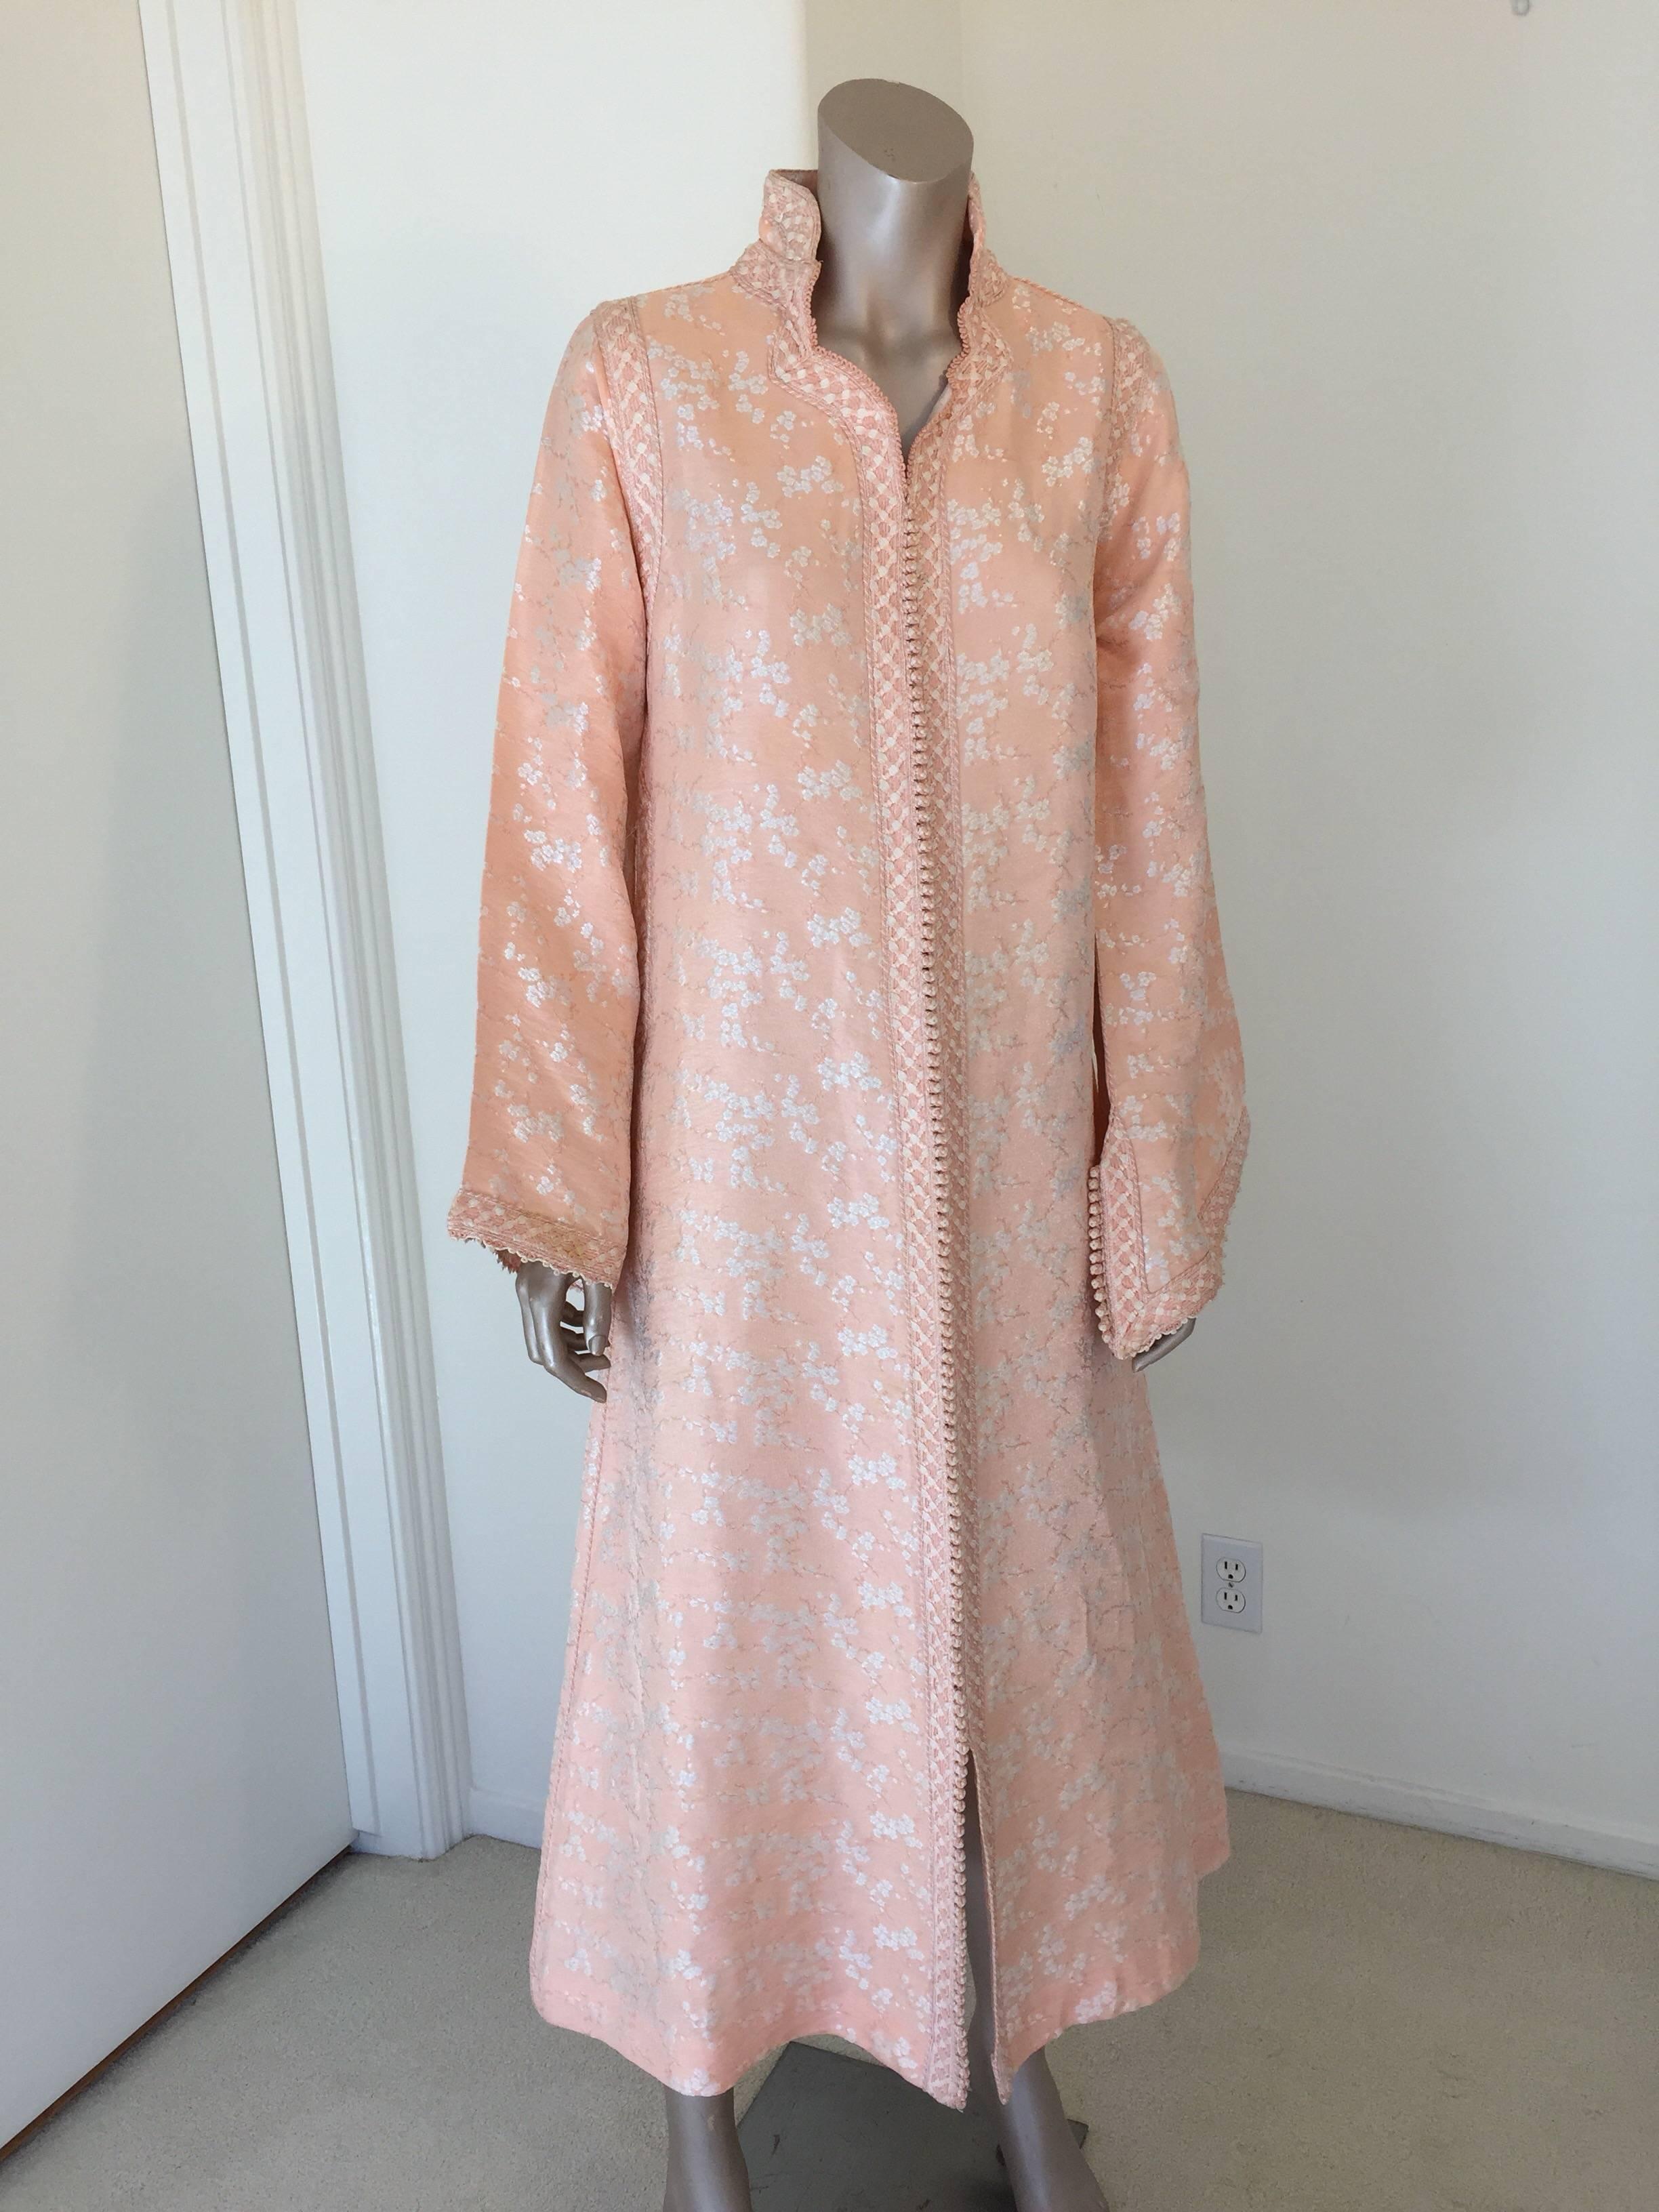 Moroccan caftan in peach brocade, maxi dress kaftan handmade by Moroccan artist. 
Handcrafted vintage exotic 1970s ceremonial caftan gown from North Africa, Morocco. 
This maxi dress caftan is made in a subtle metallic brocade with shades of peach